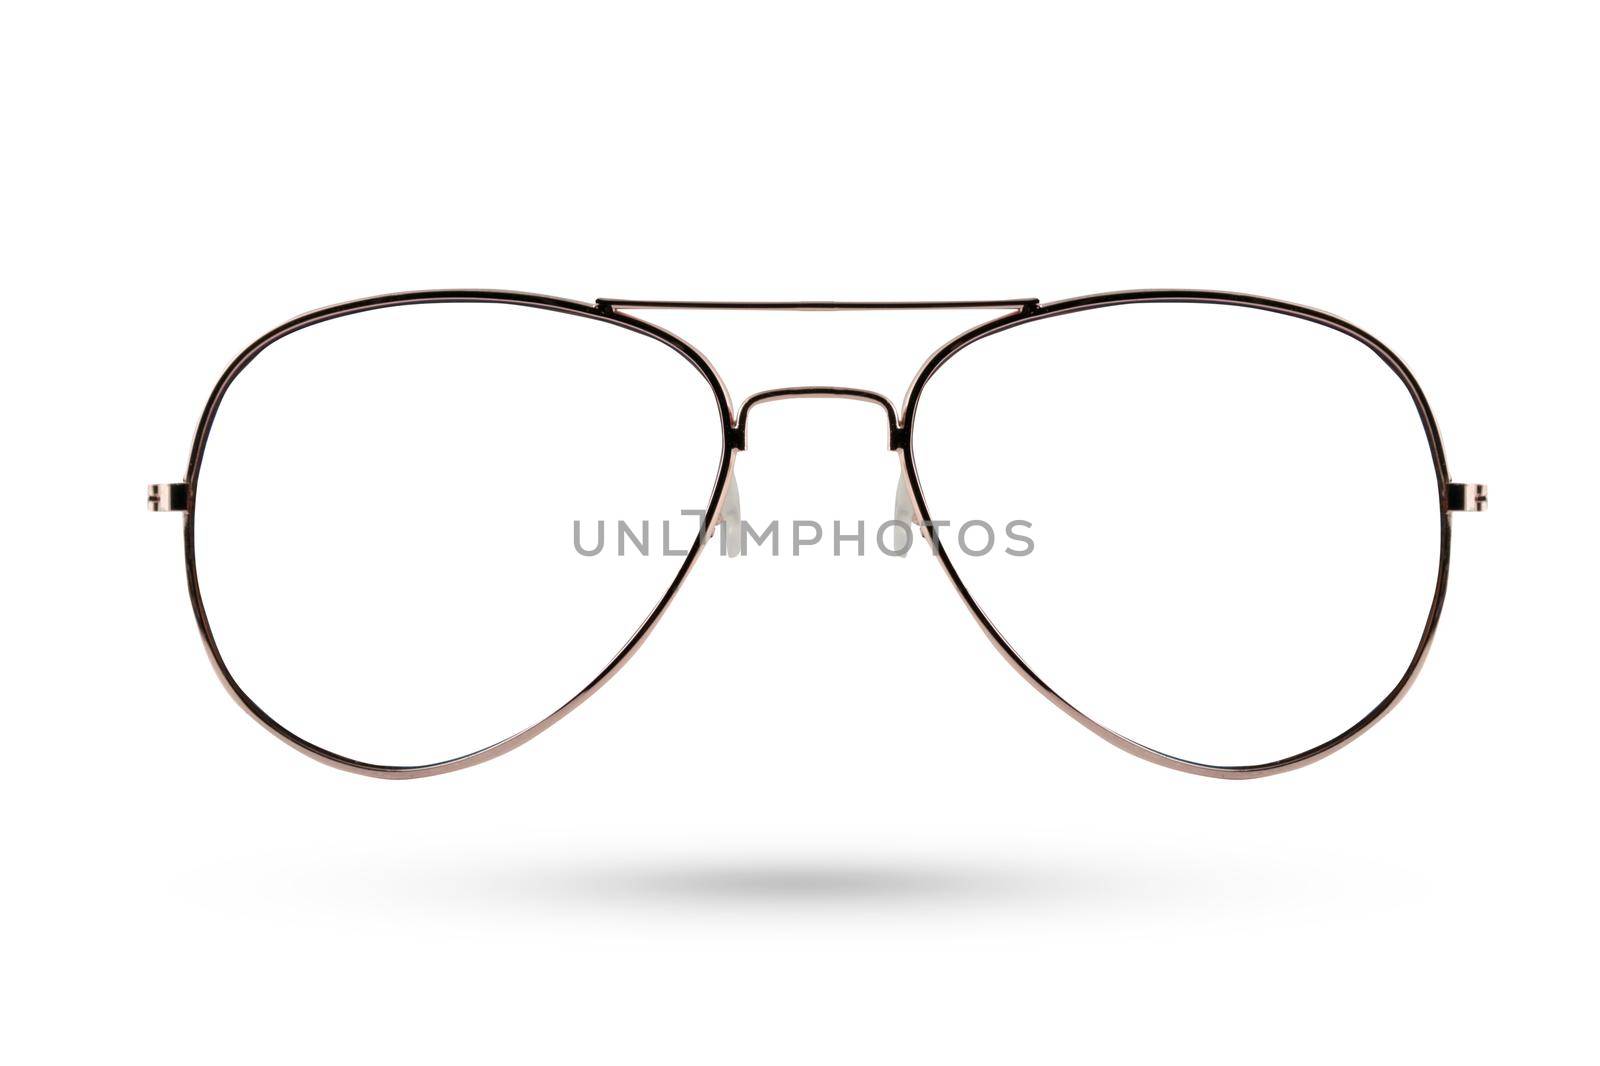 Fashion glasses style metal-framed isolated on white background. by jayzynism